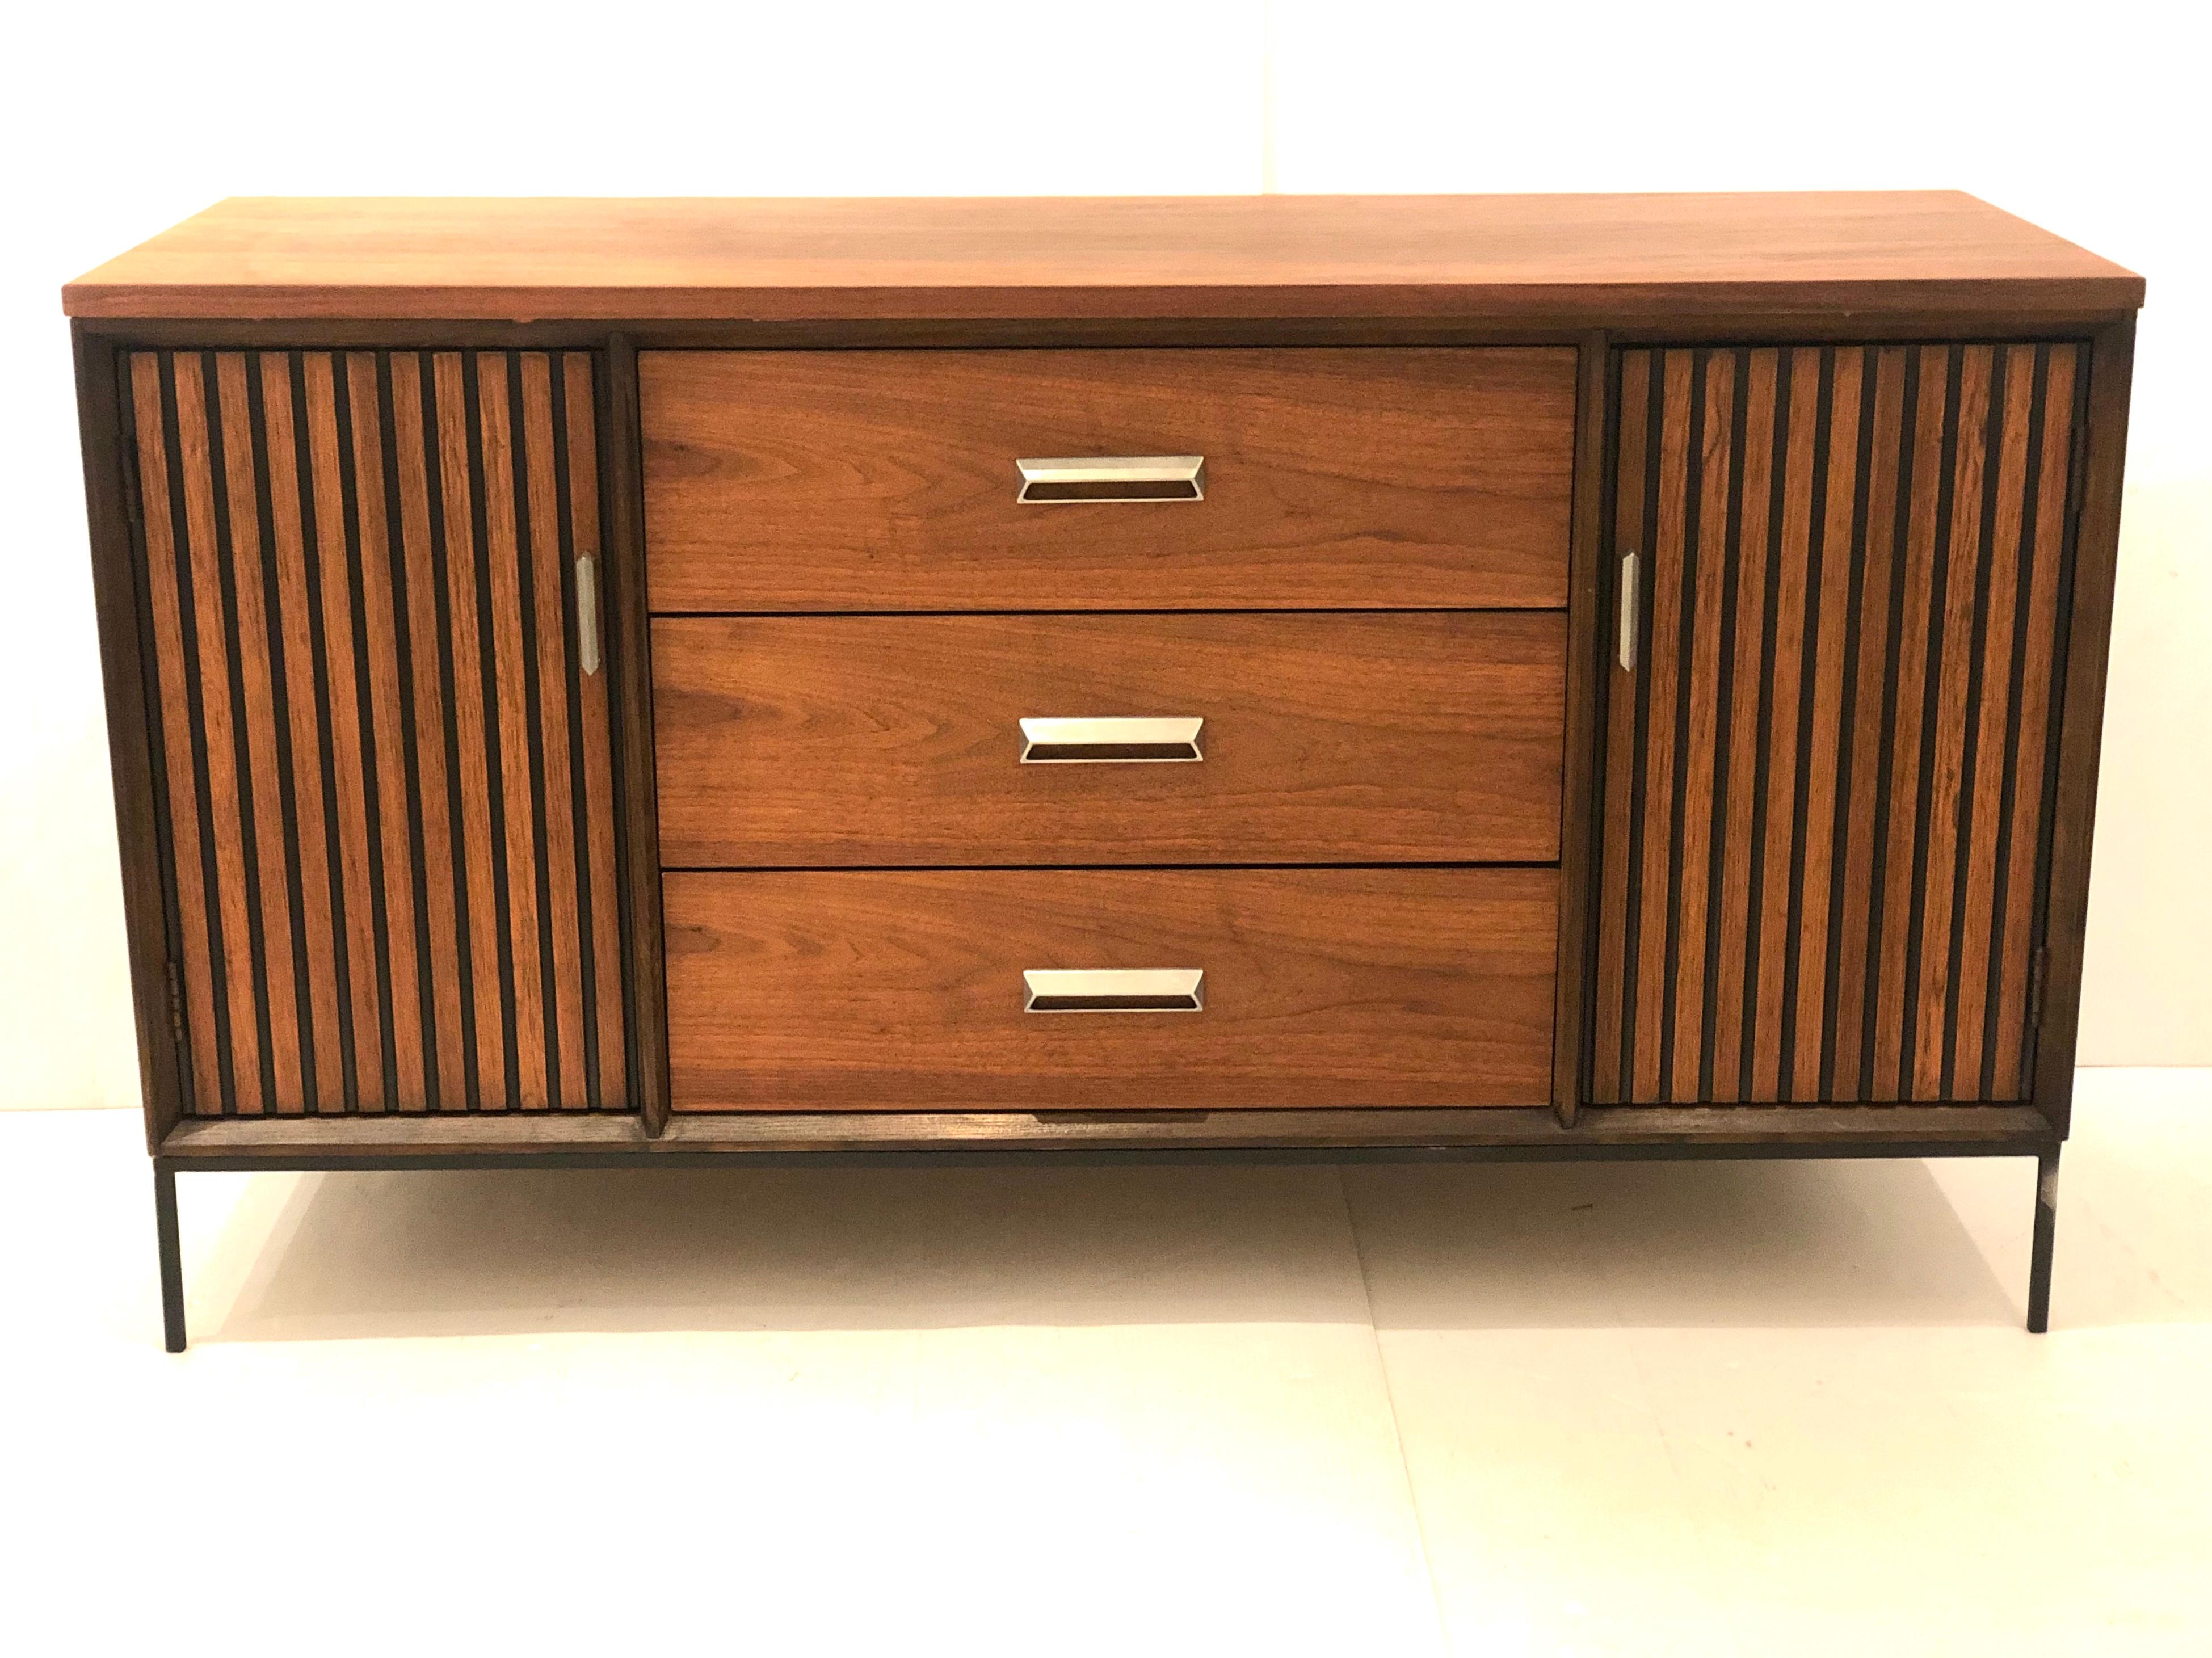 Simple well design small Mid-Century Modern walnut credenza, circa 1950s with solid iron black painted base , this piece has been refinished and hand rubbed oiled, some natural imperfections a small stain on the top as shown, nothing major but needs